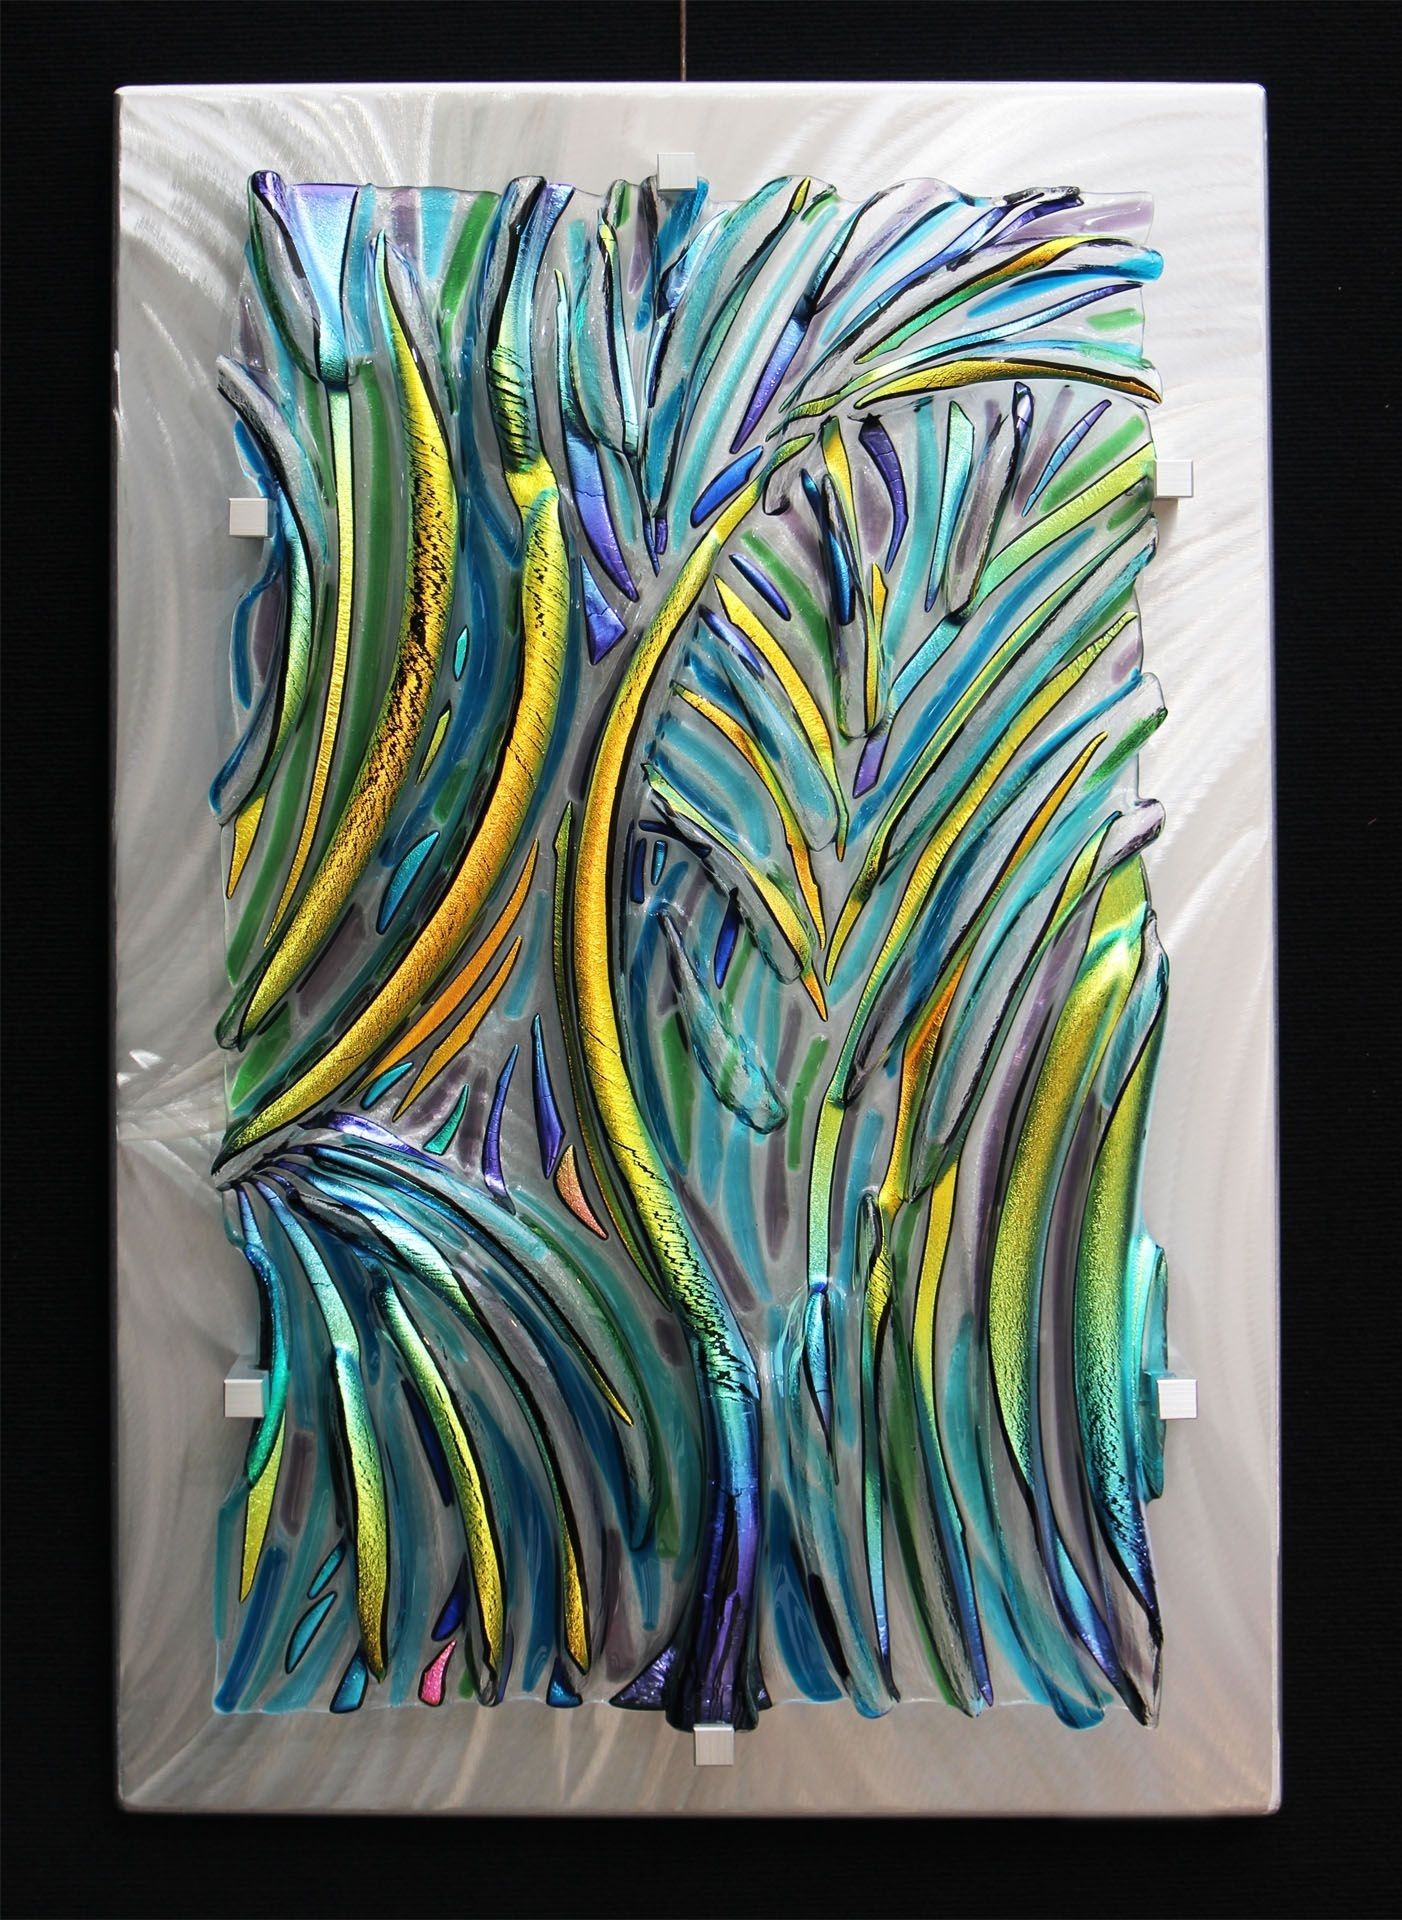 Fused Glass Wall Artfrank Thompson | I Love Glass!! | Pinterest Within Glass Wall Art (View 2 of 20)